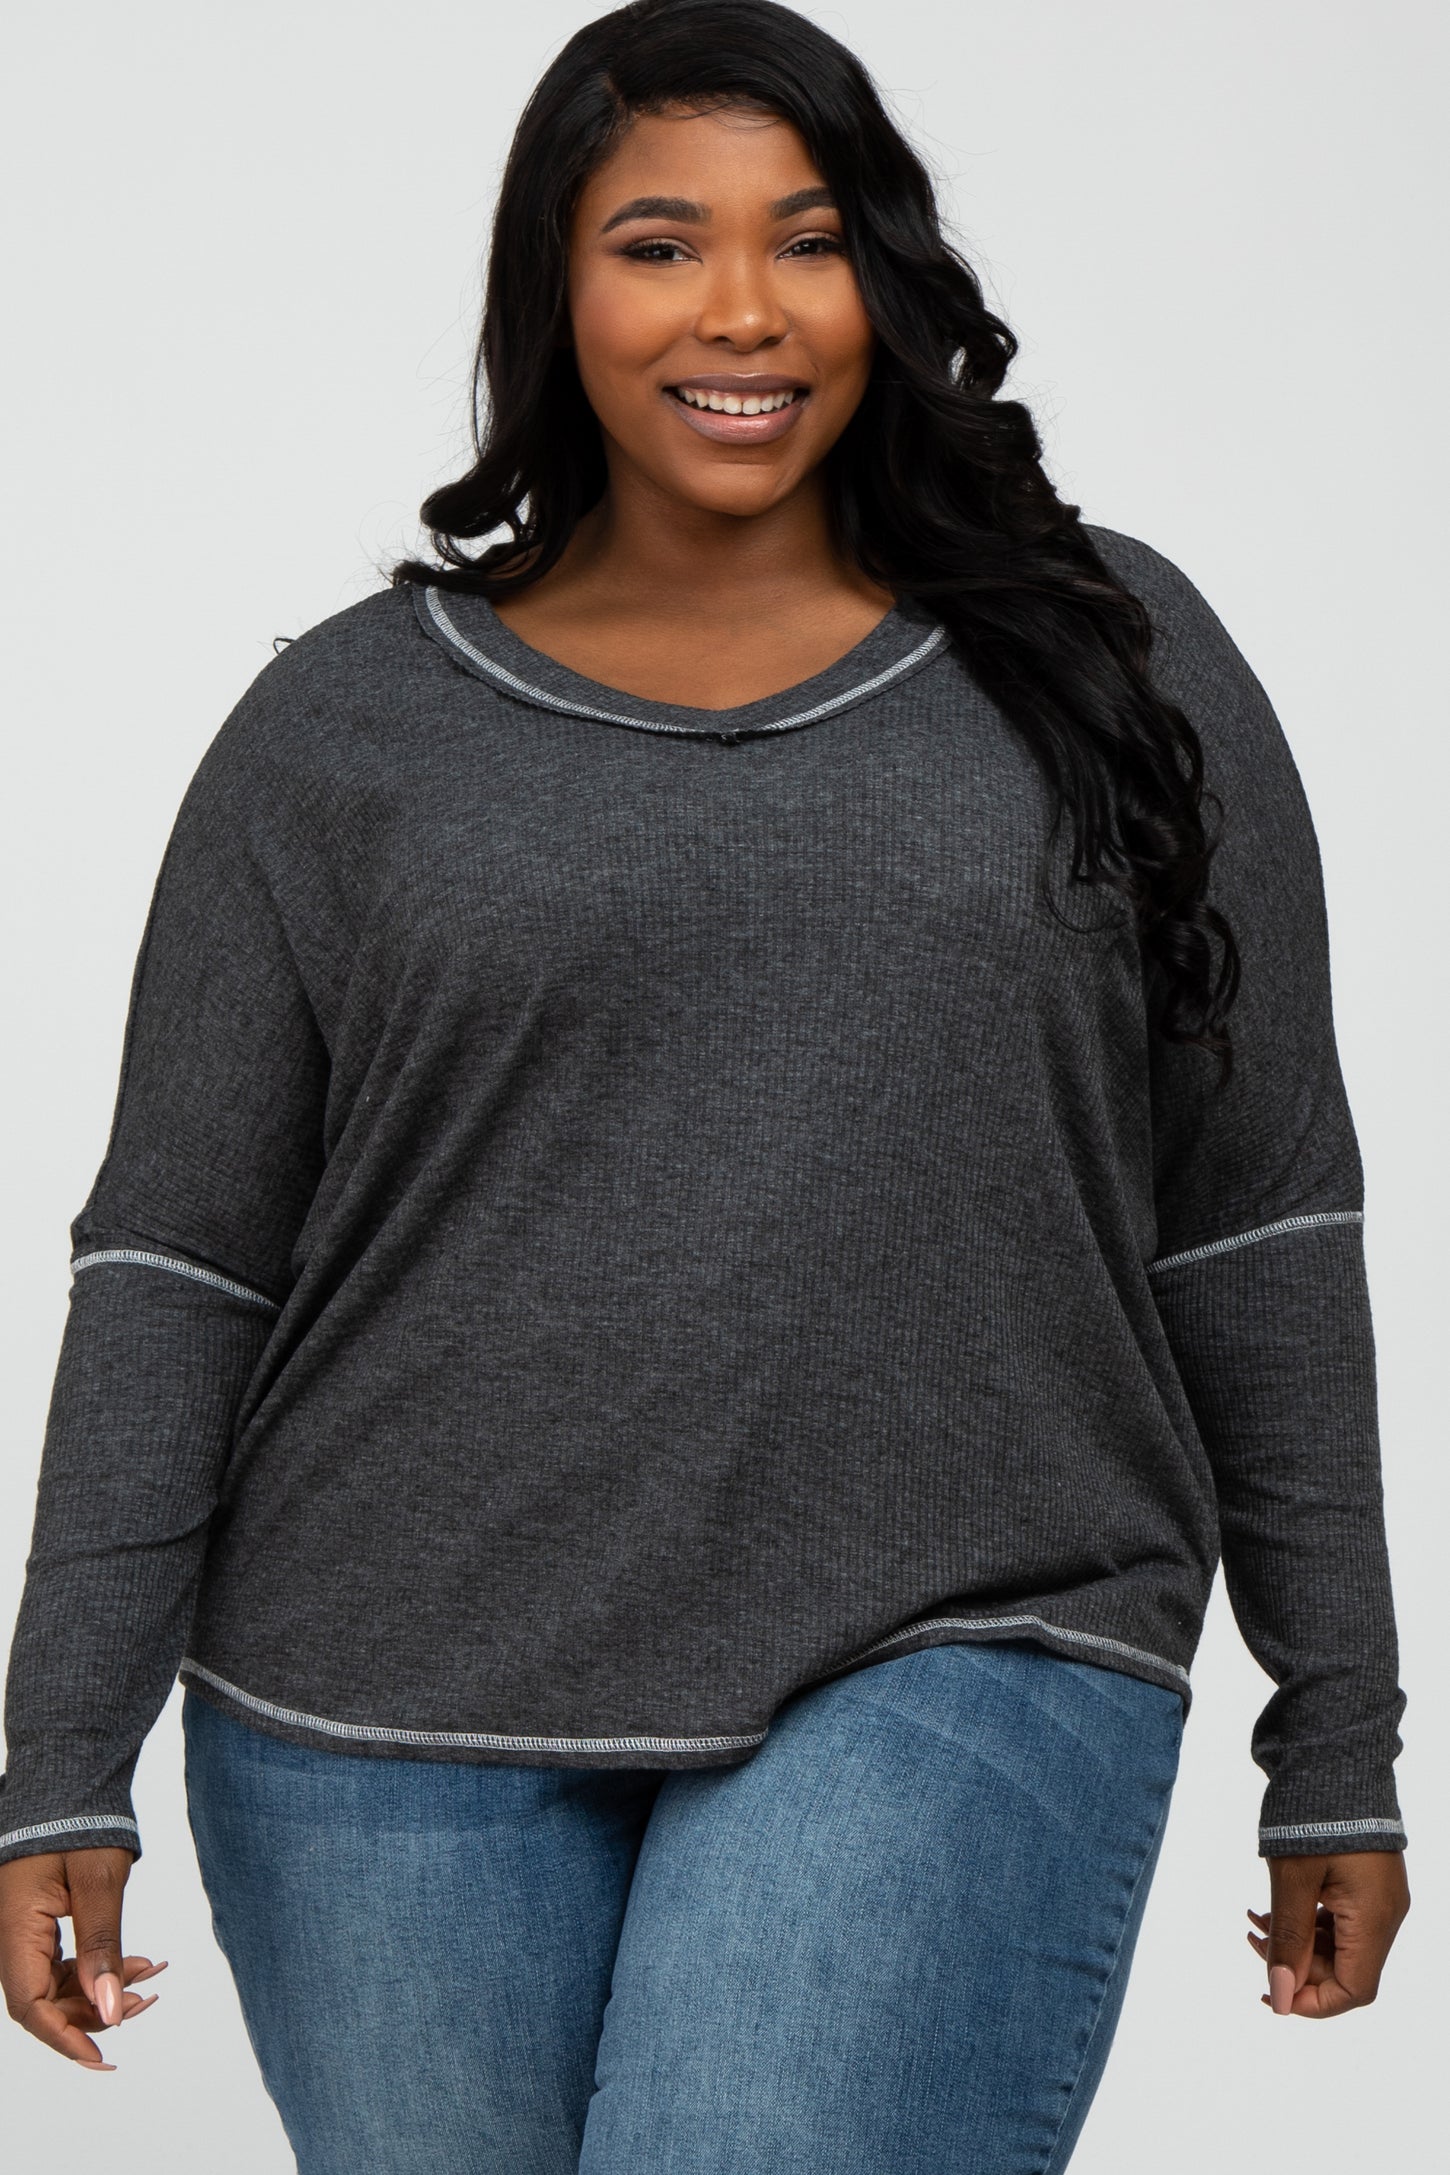 Charcoal Contrast Stitch Maternity Plus Dolman Sleeve Top